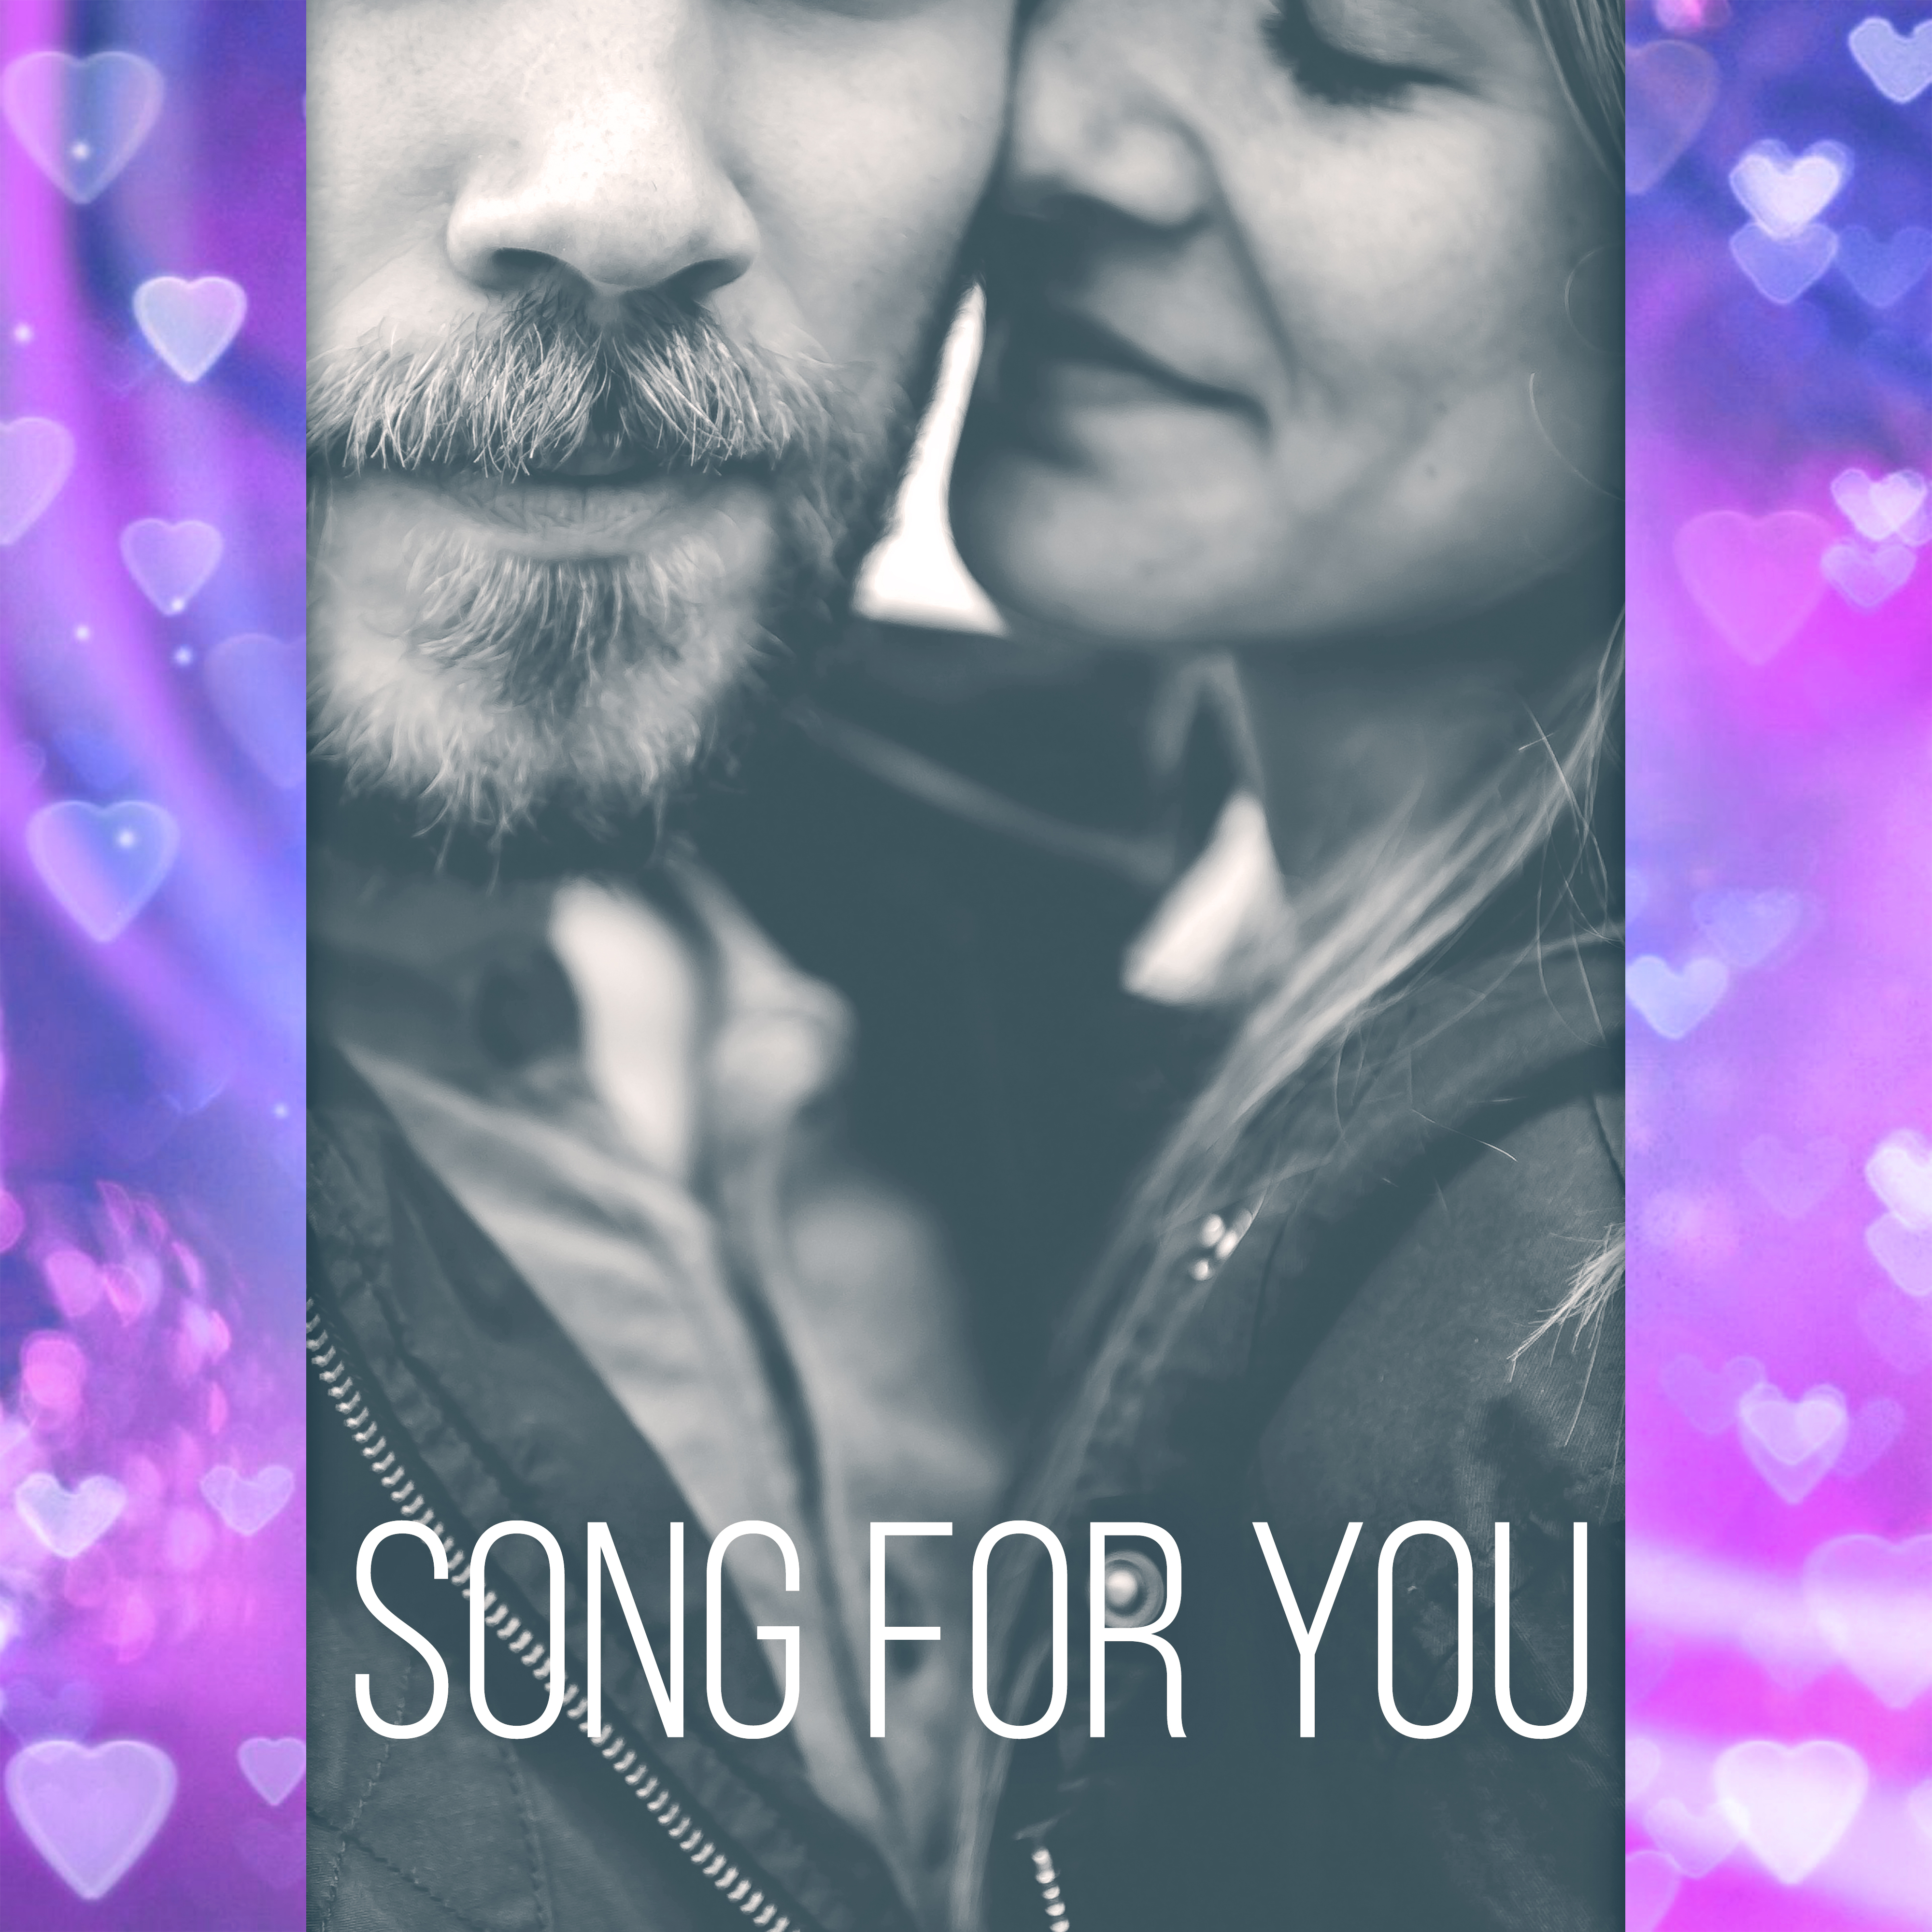 Song for You - **** Songs, Happy Hour, Intimate Moments, Coktail Piano Bar, Dinner Party